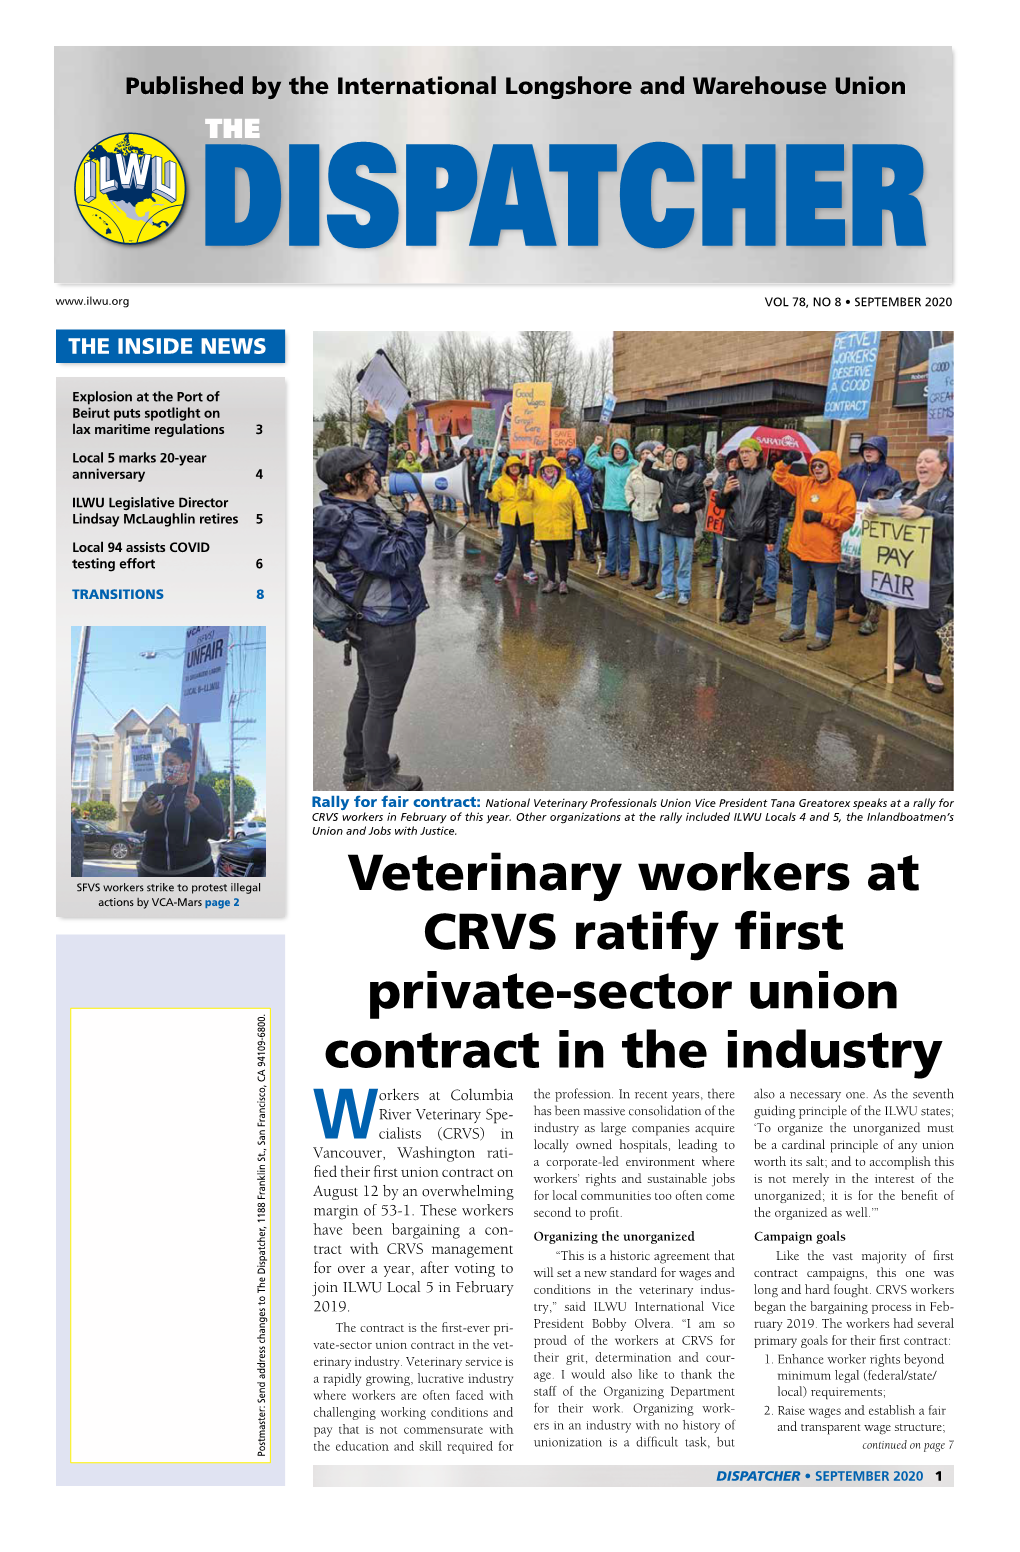 Veterinary Workers at CRVS Ratify First Private-Sector Union Contract in the Industry